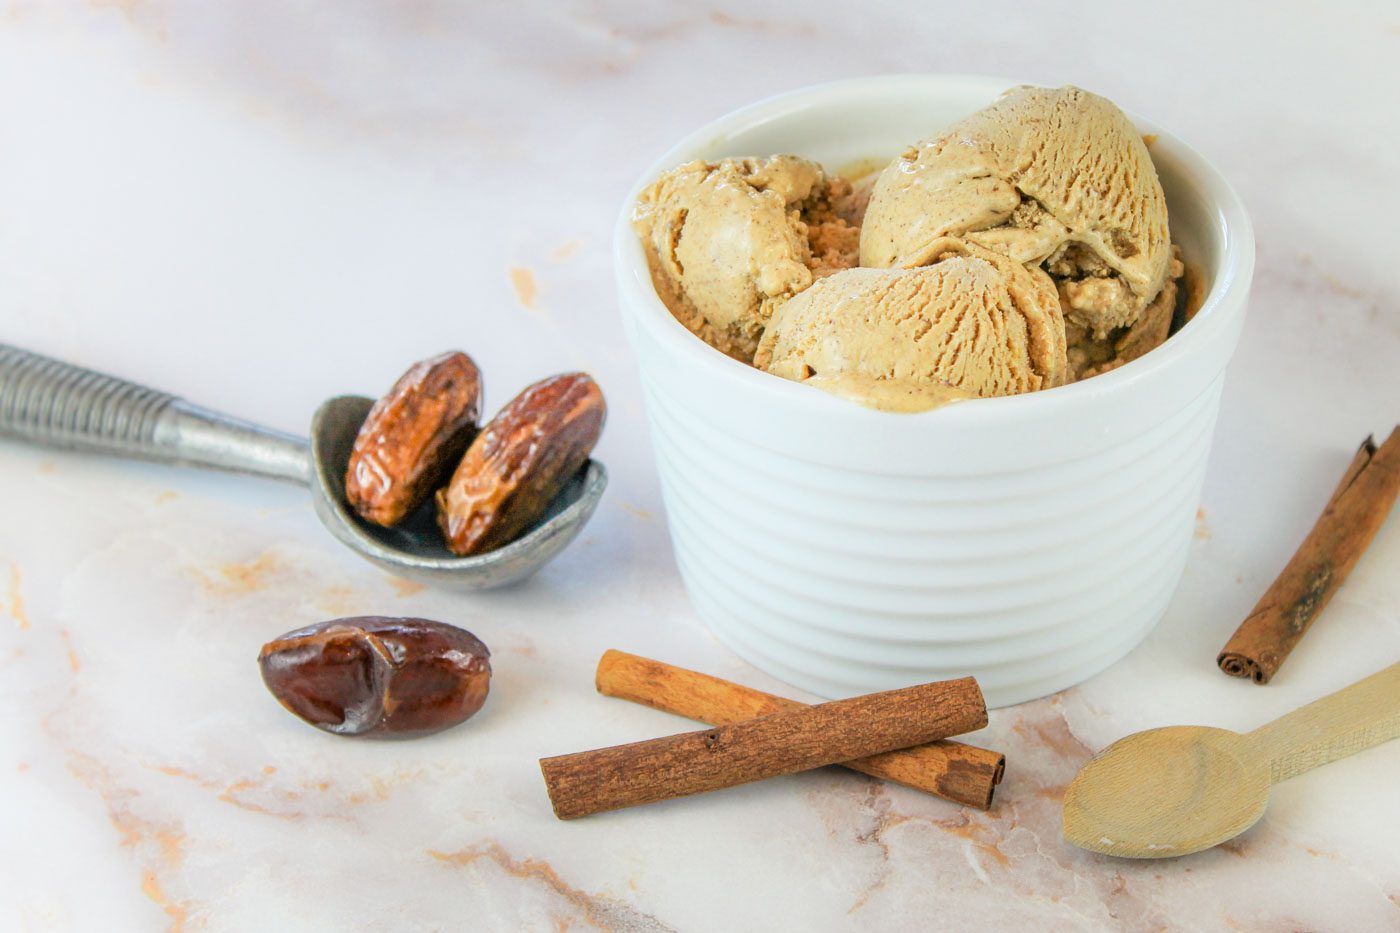 custard bowl of ice cream sits aside spoons, cinnamon sticks and dried dates